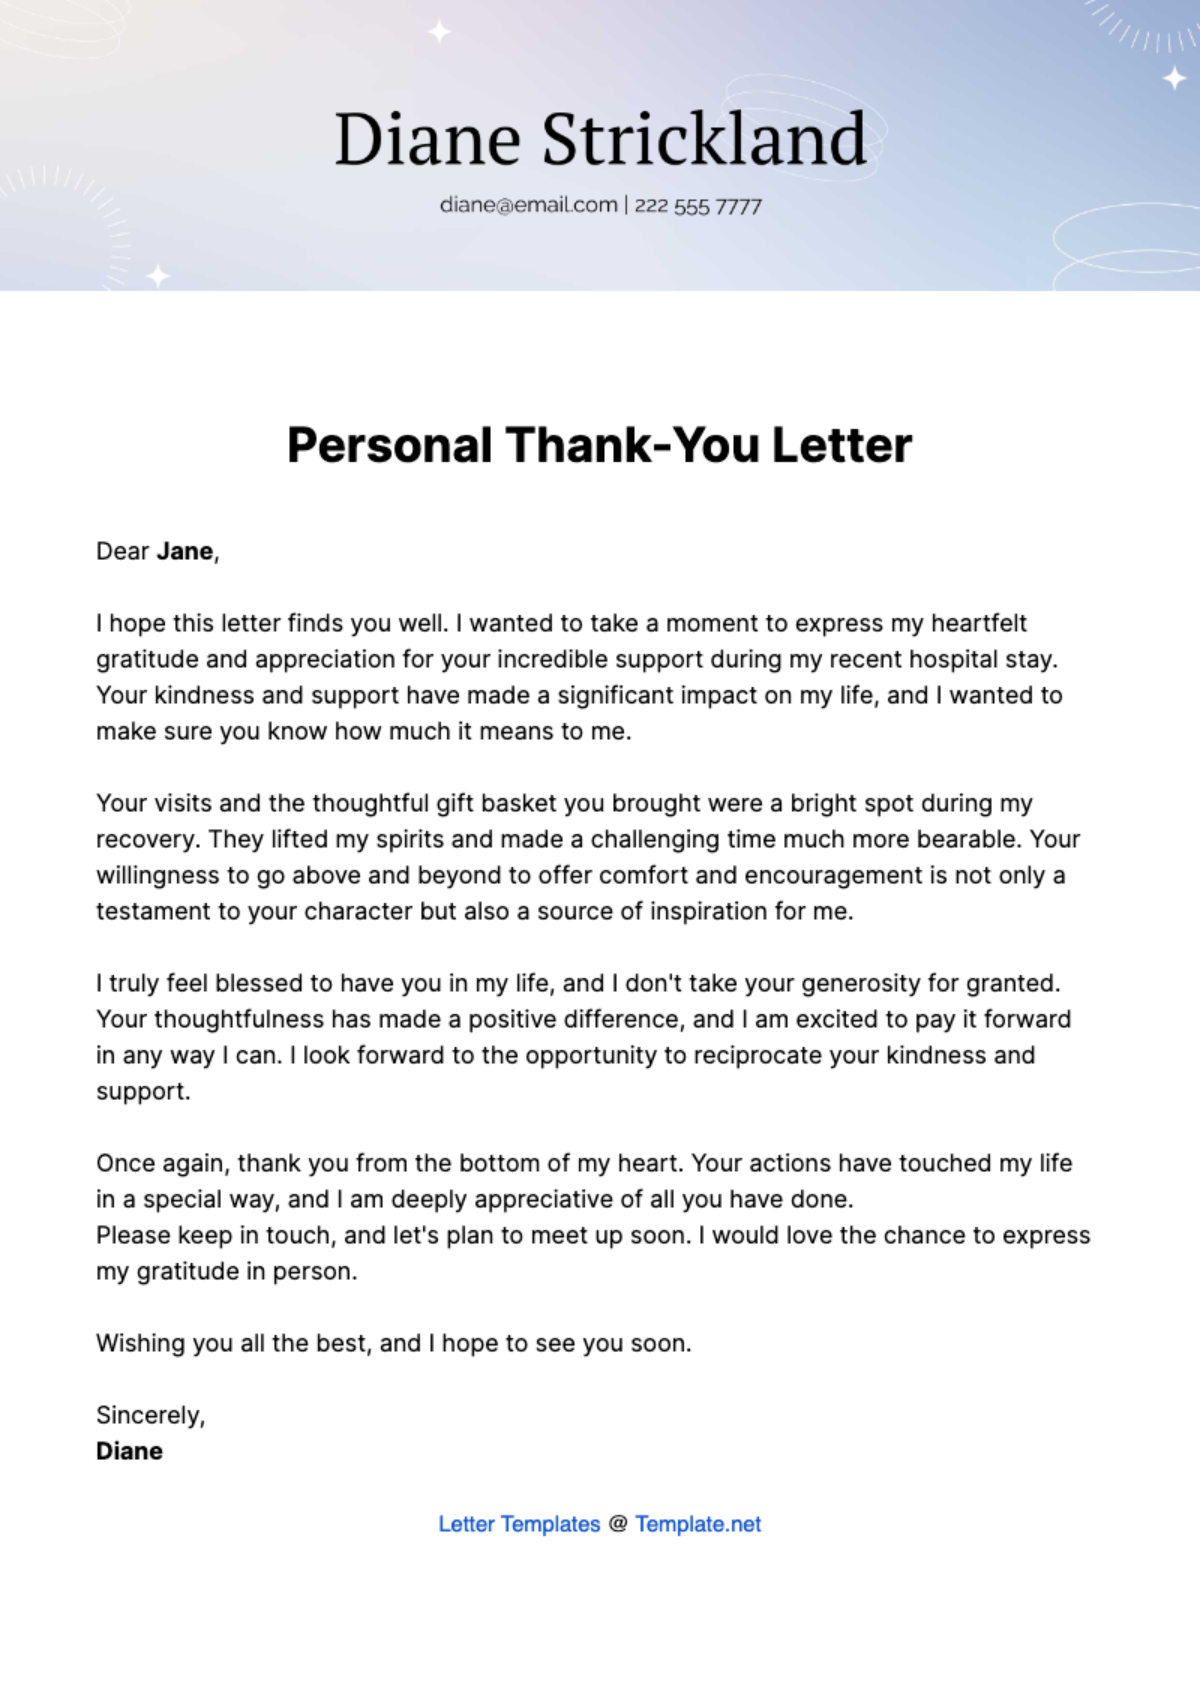 Free Personal Thank-You Letter  Template